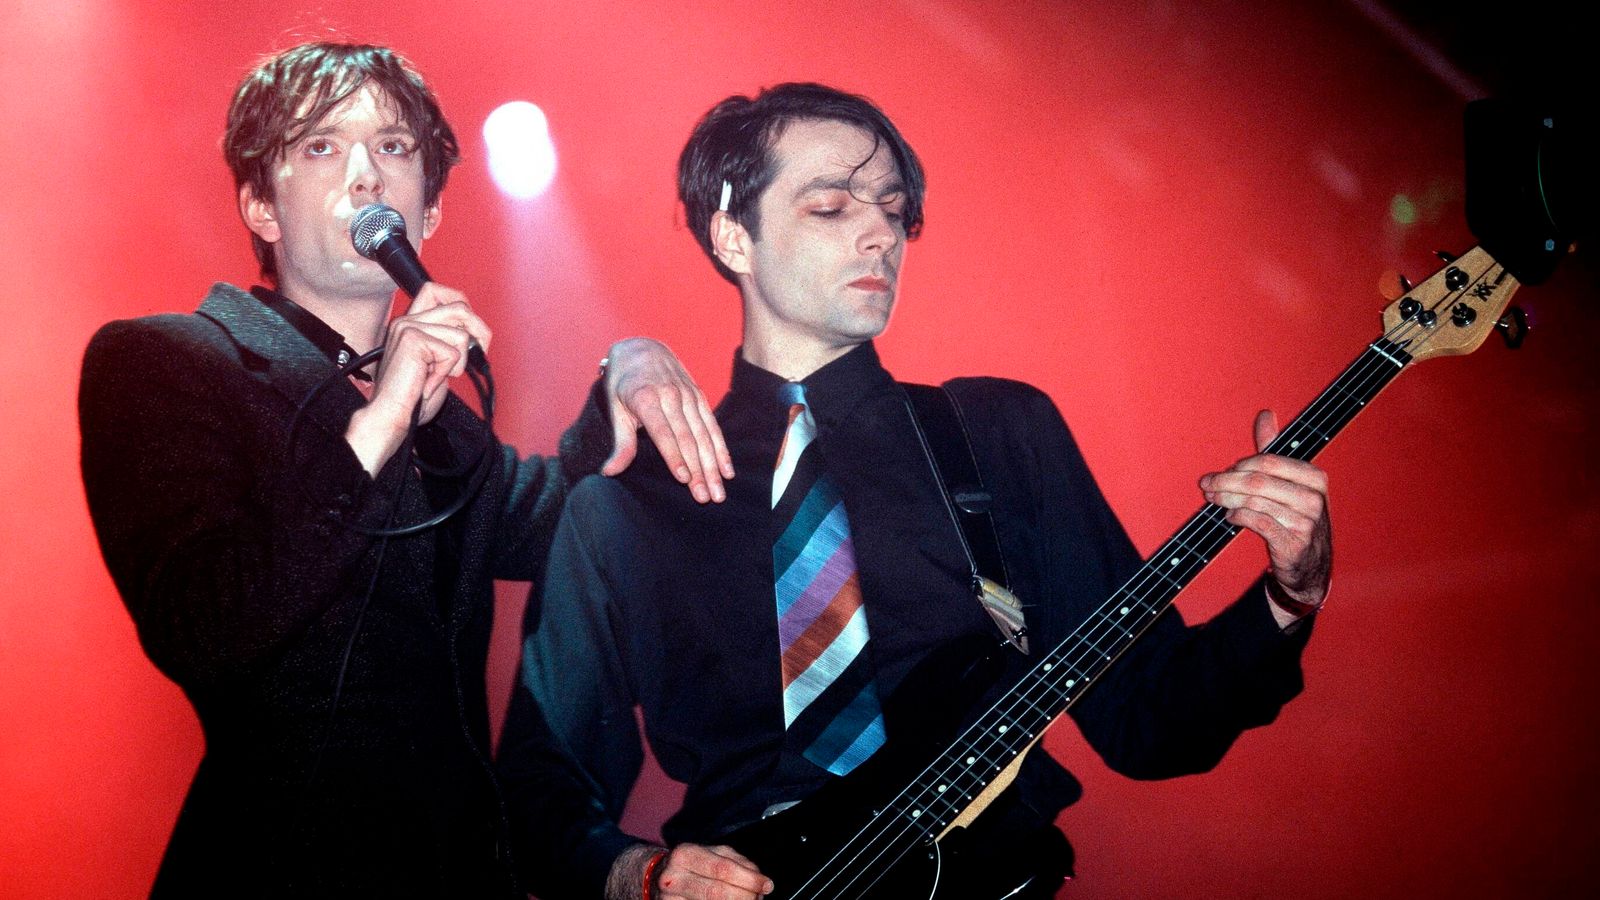 Pulp announce death of bass player Steve Mackey - paying tribute to their 'beloved friend'